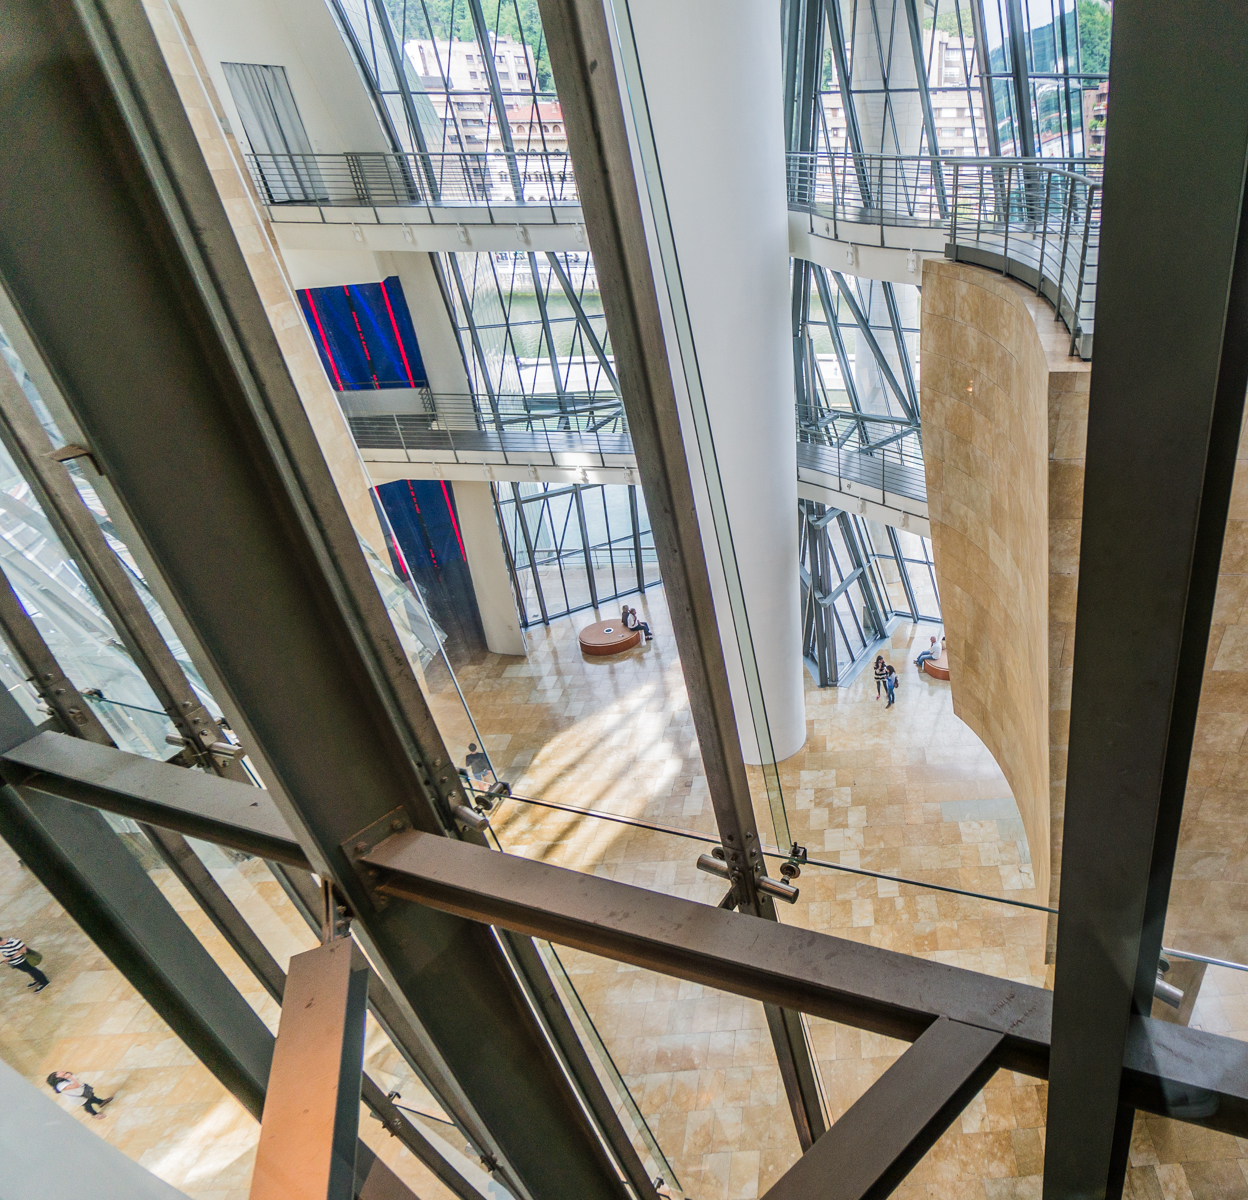 Lobby of Guggenheim Museum Bilbao viewed from one of the glass-walled elevators | Photo by Mike Hudak